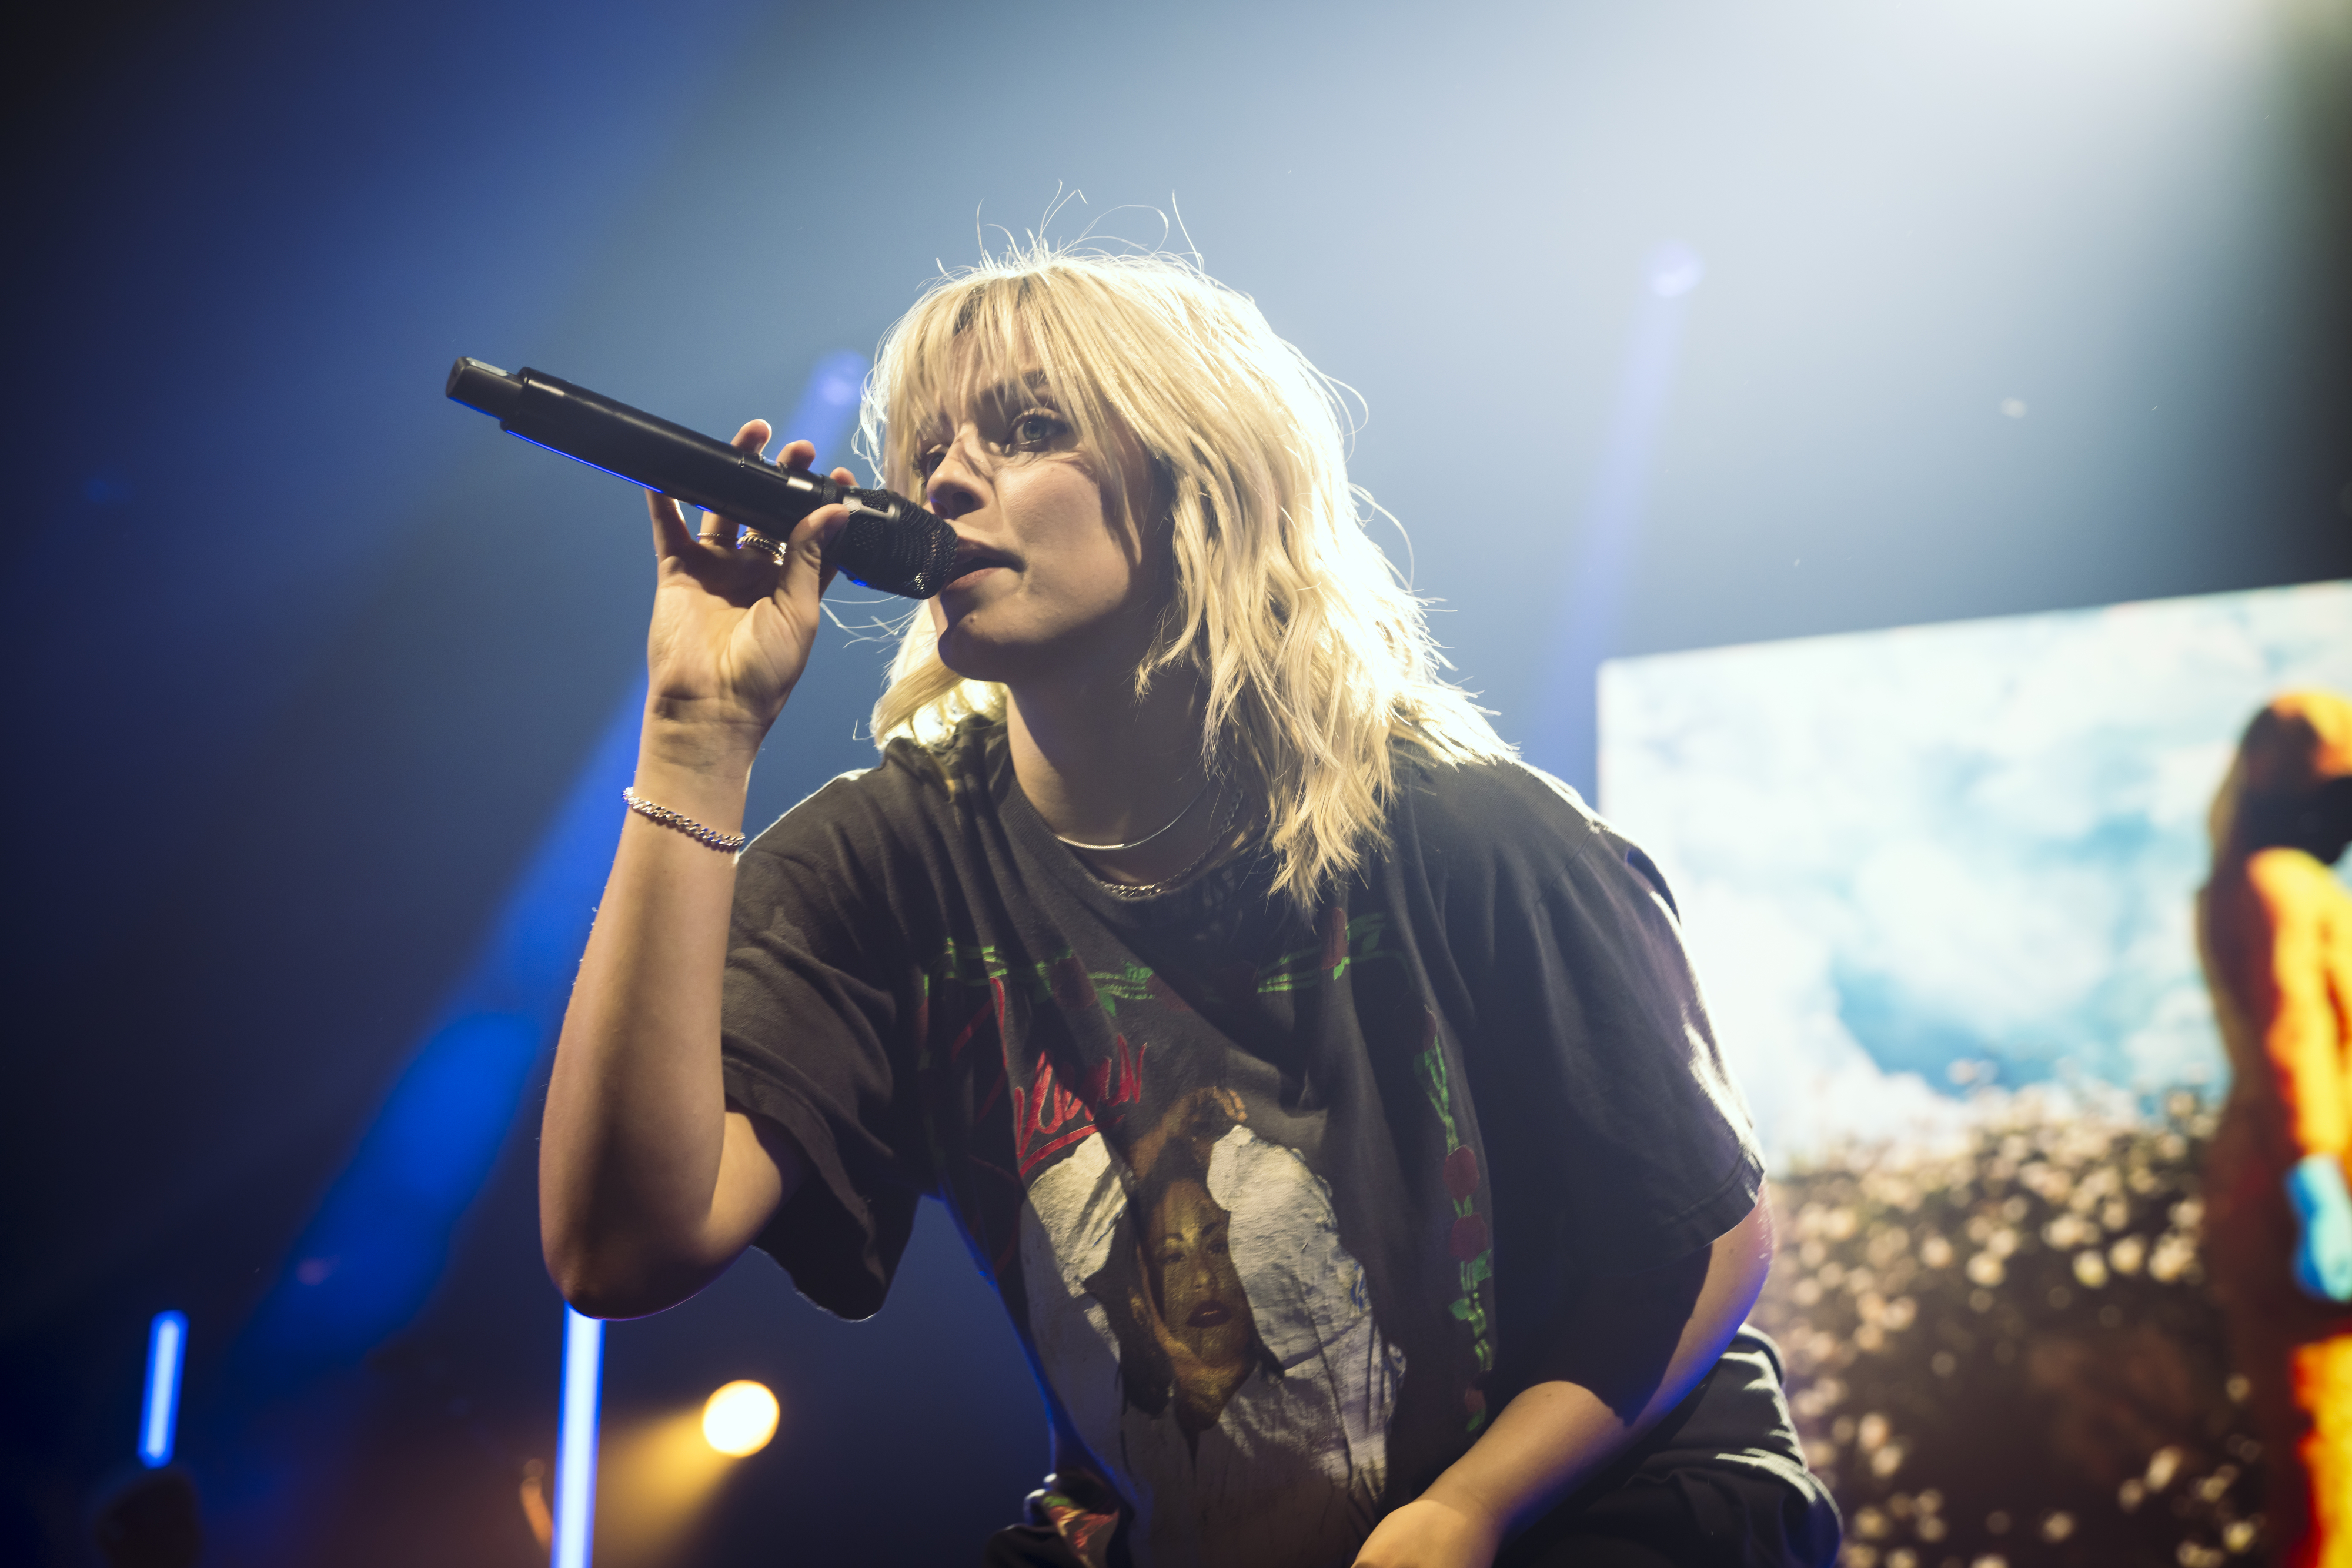 Reneé Rapp with microphone onstage wearing a graphic T-shirt